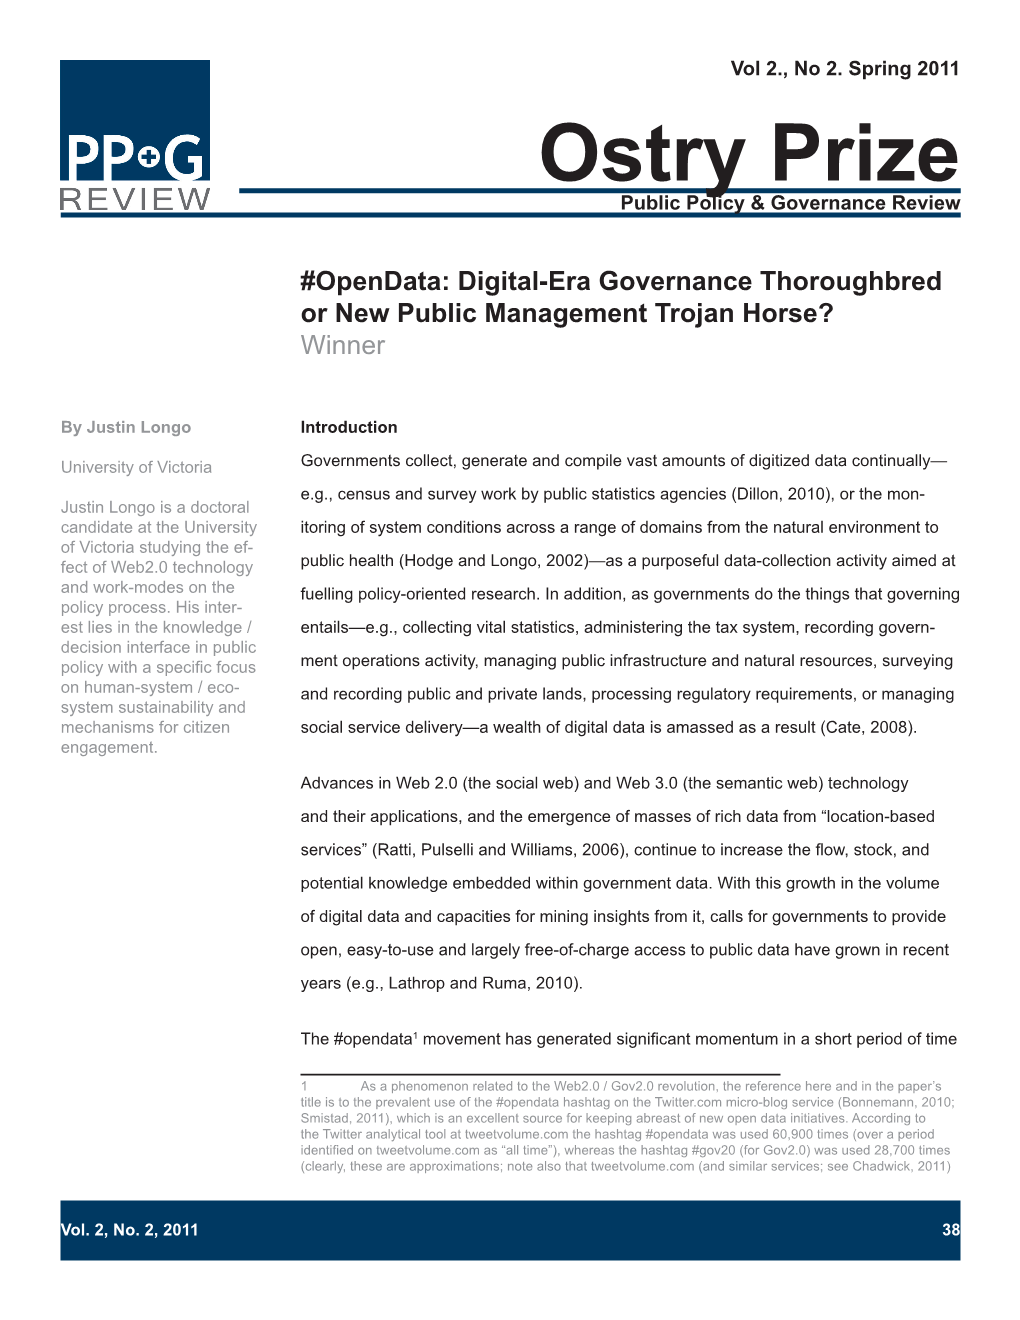 Ostry Prize Public Policy & Governance Review